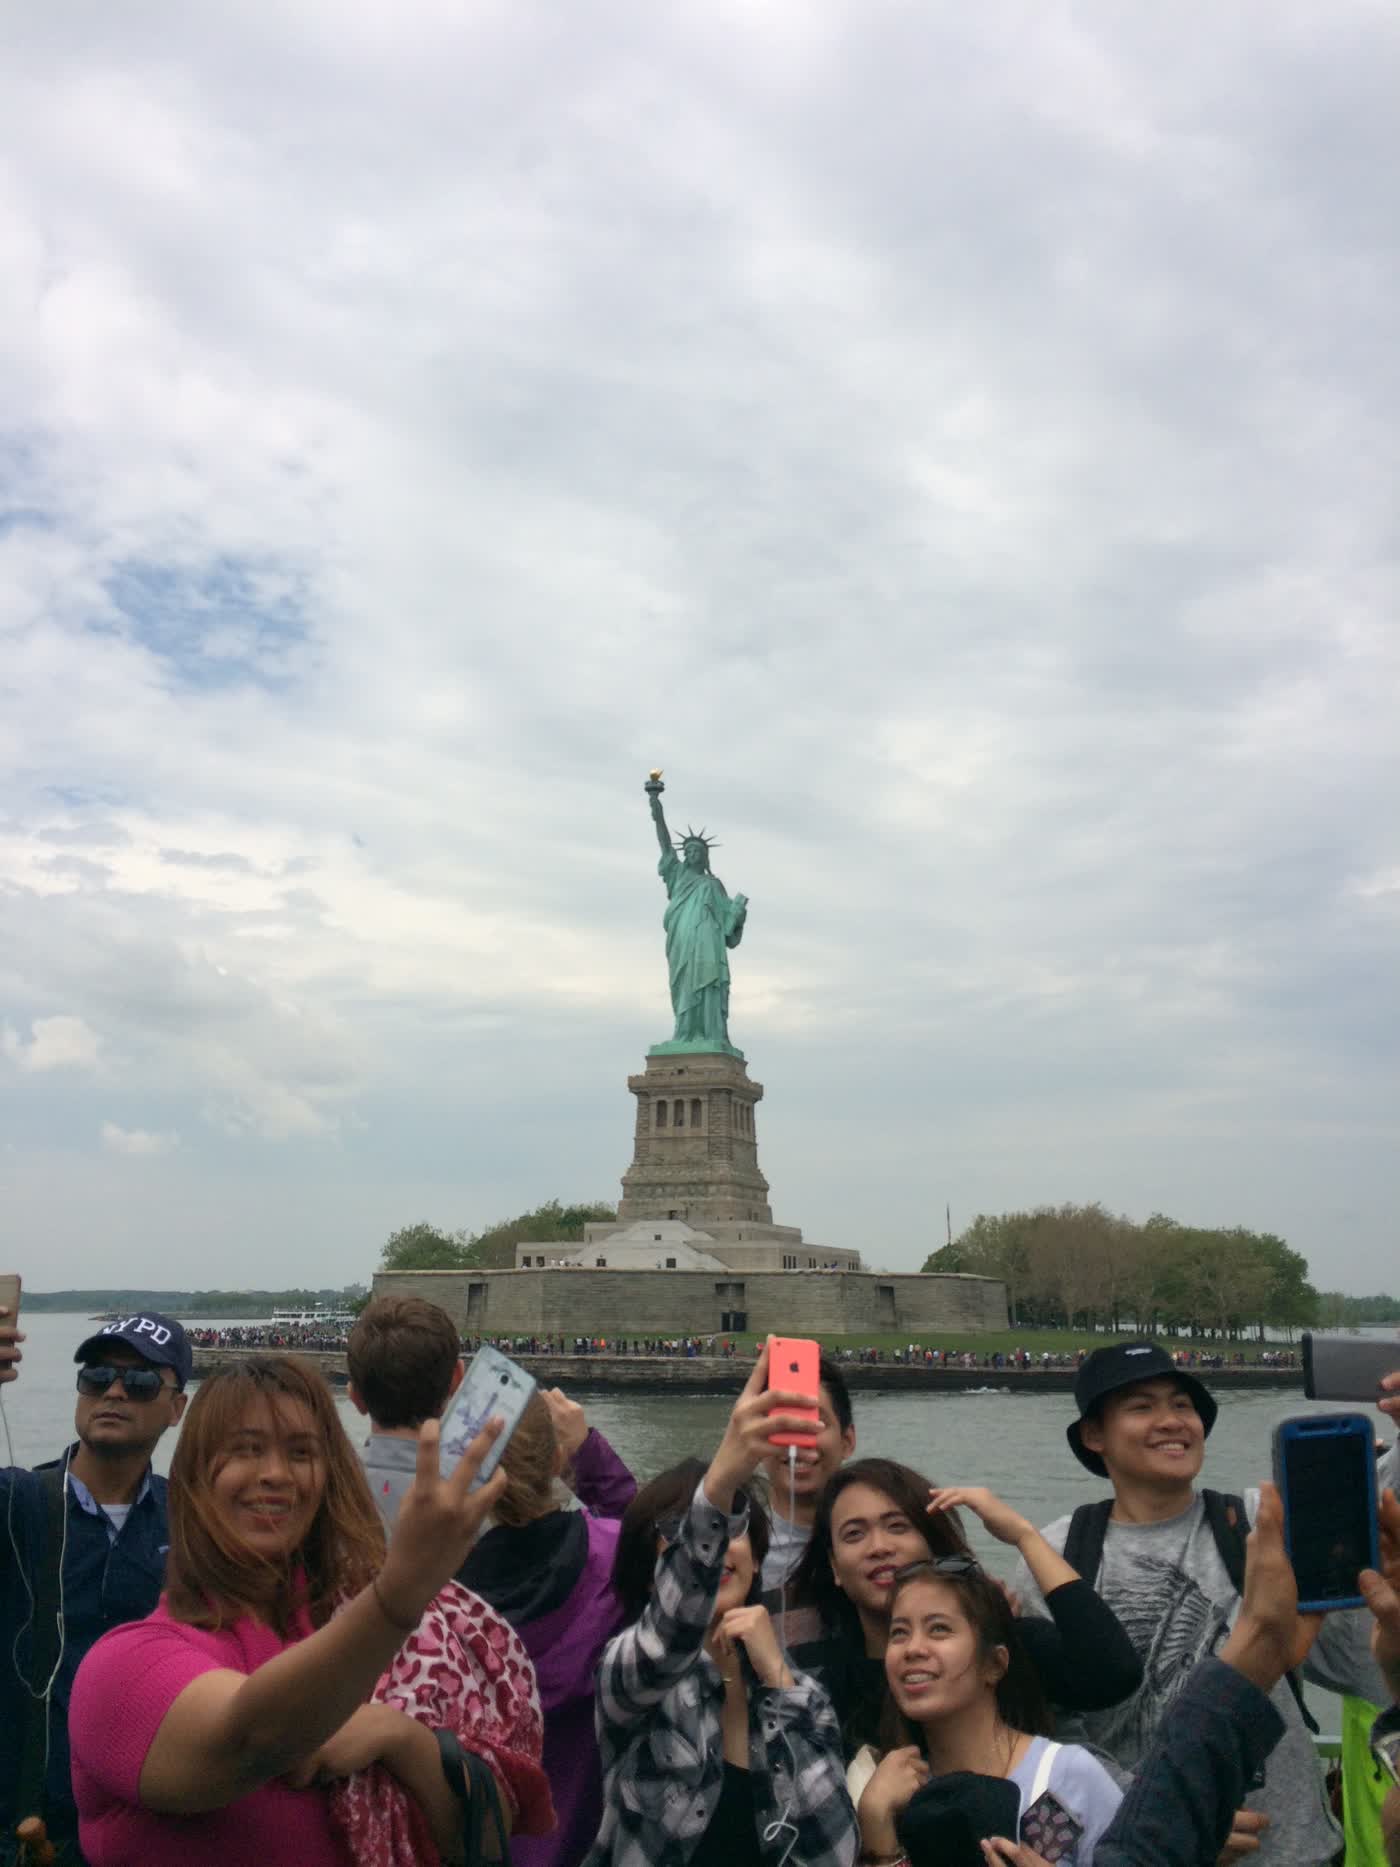 The Statue of Liberty as seen from the ferry, with a crowd of tourists taking selfies in the foreground.